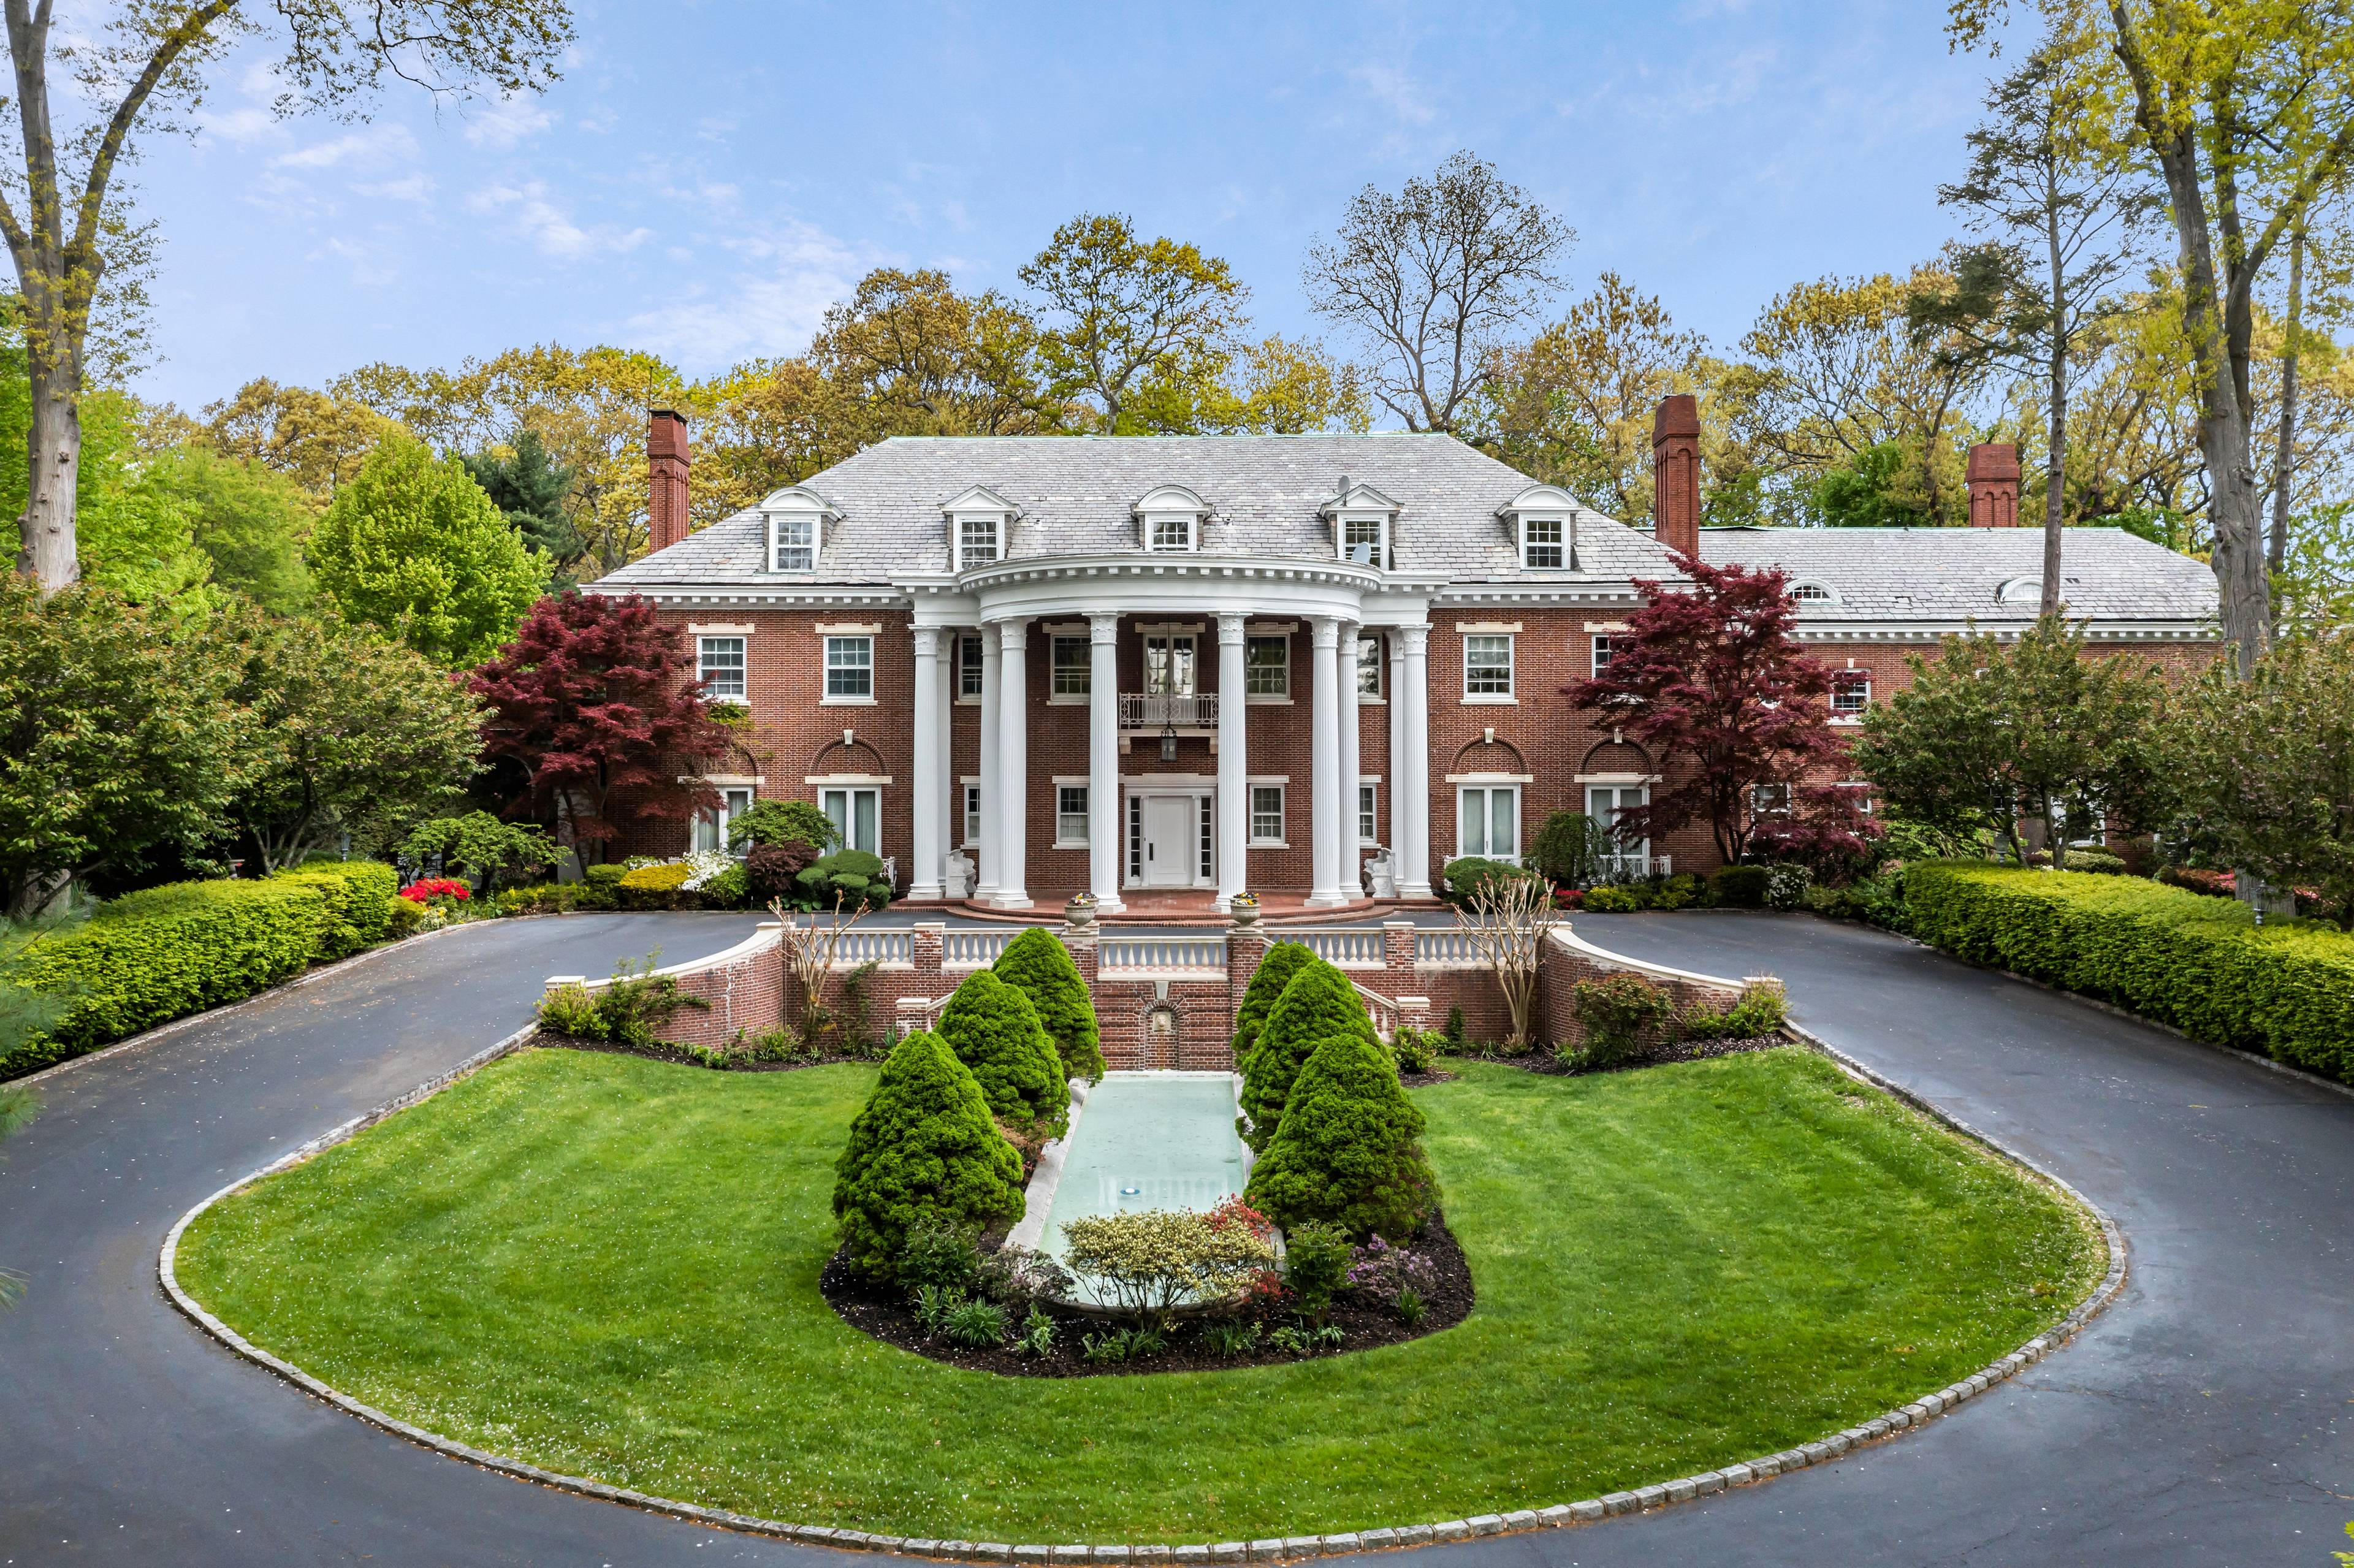 Breathtaking Historical Estate on 9+ Acres in Muttontown